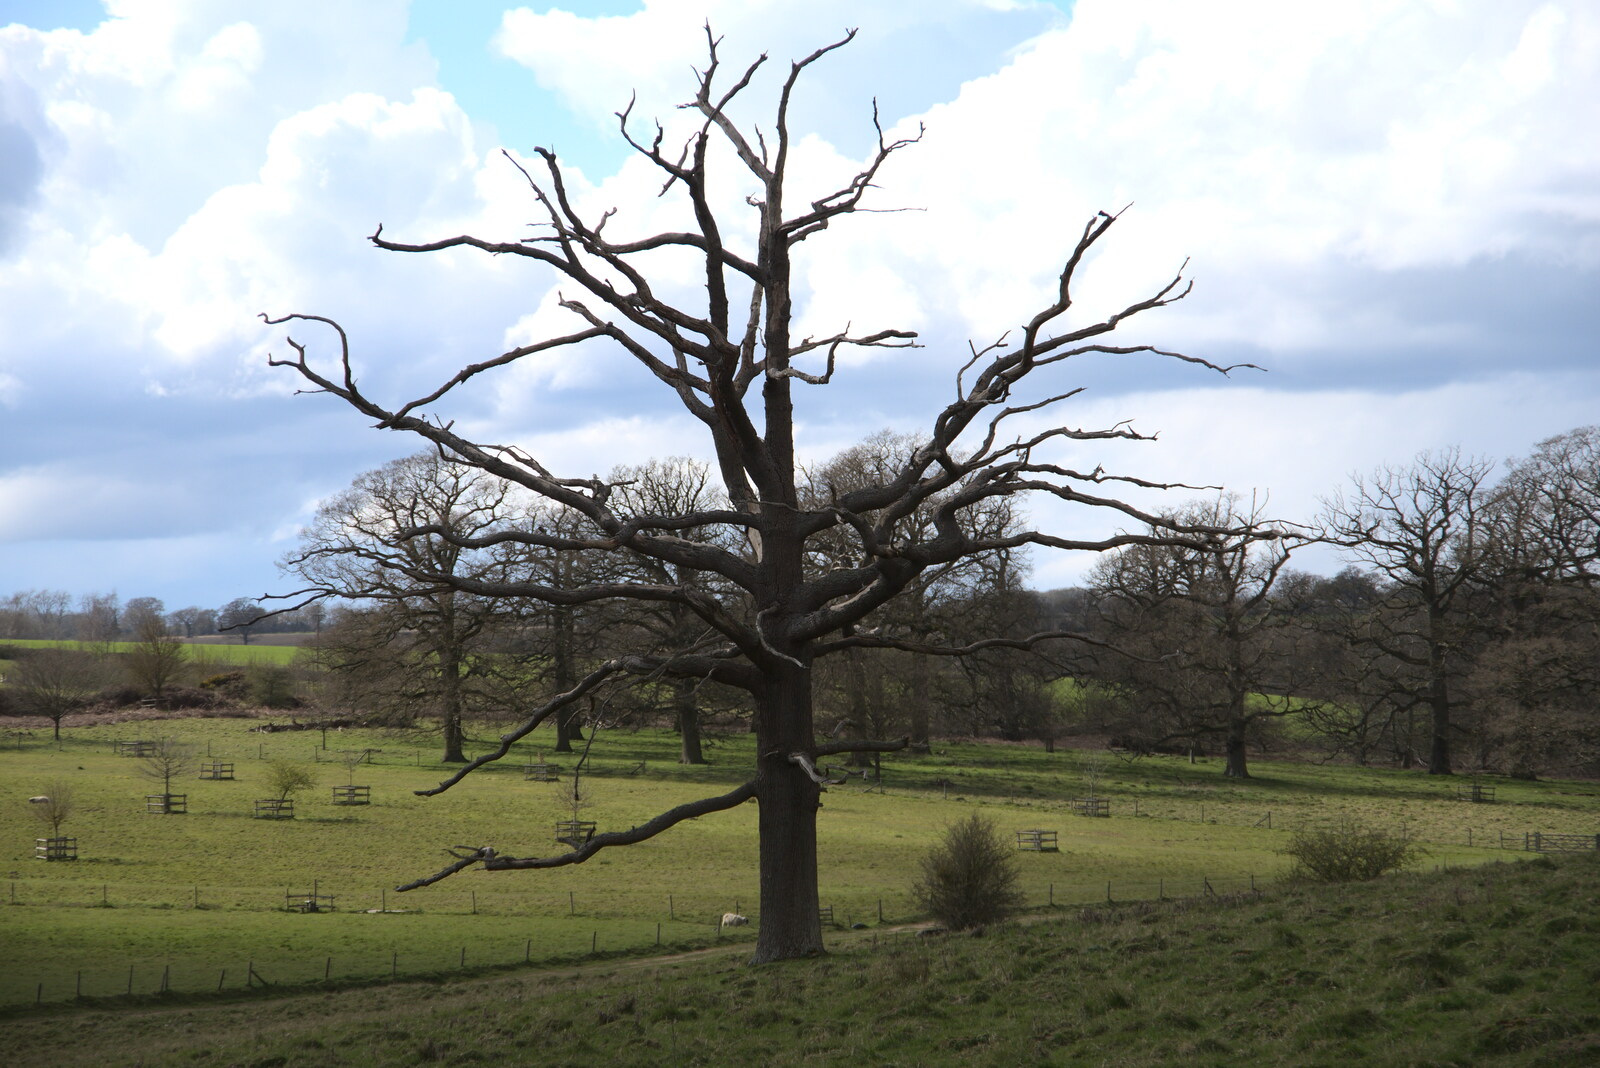 A dead tree from A Return to Ickworth House, Horringer, Suffolk - 11th April 2021